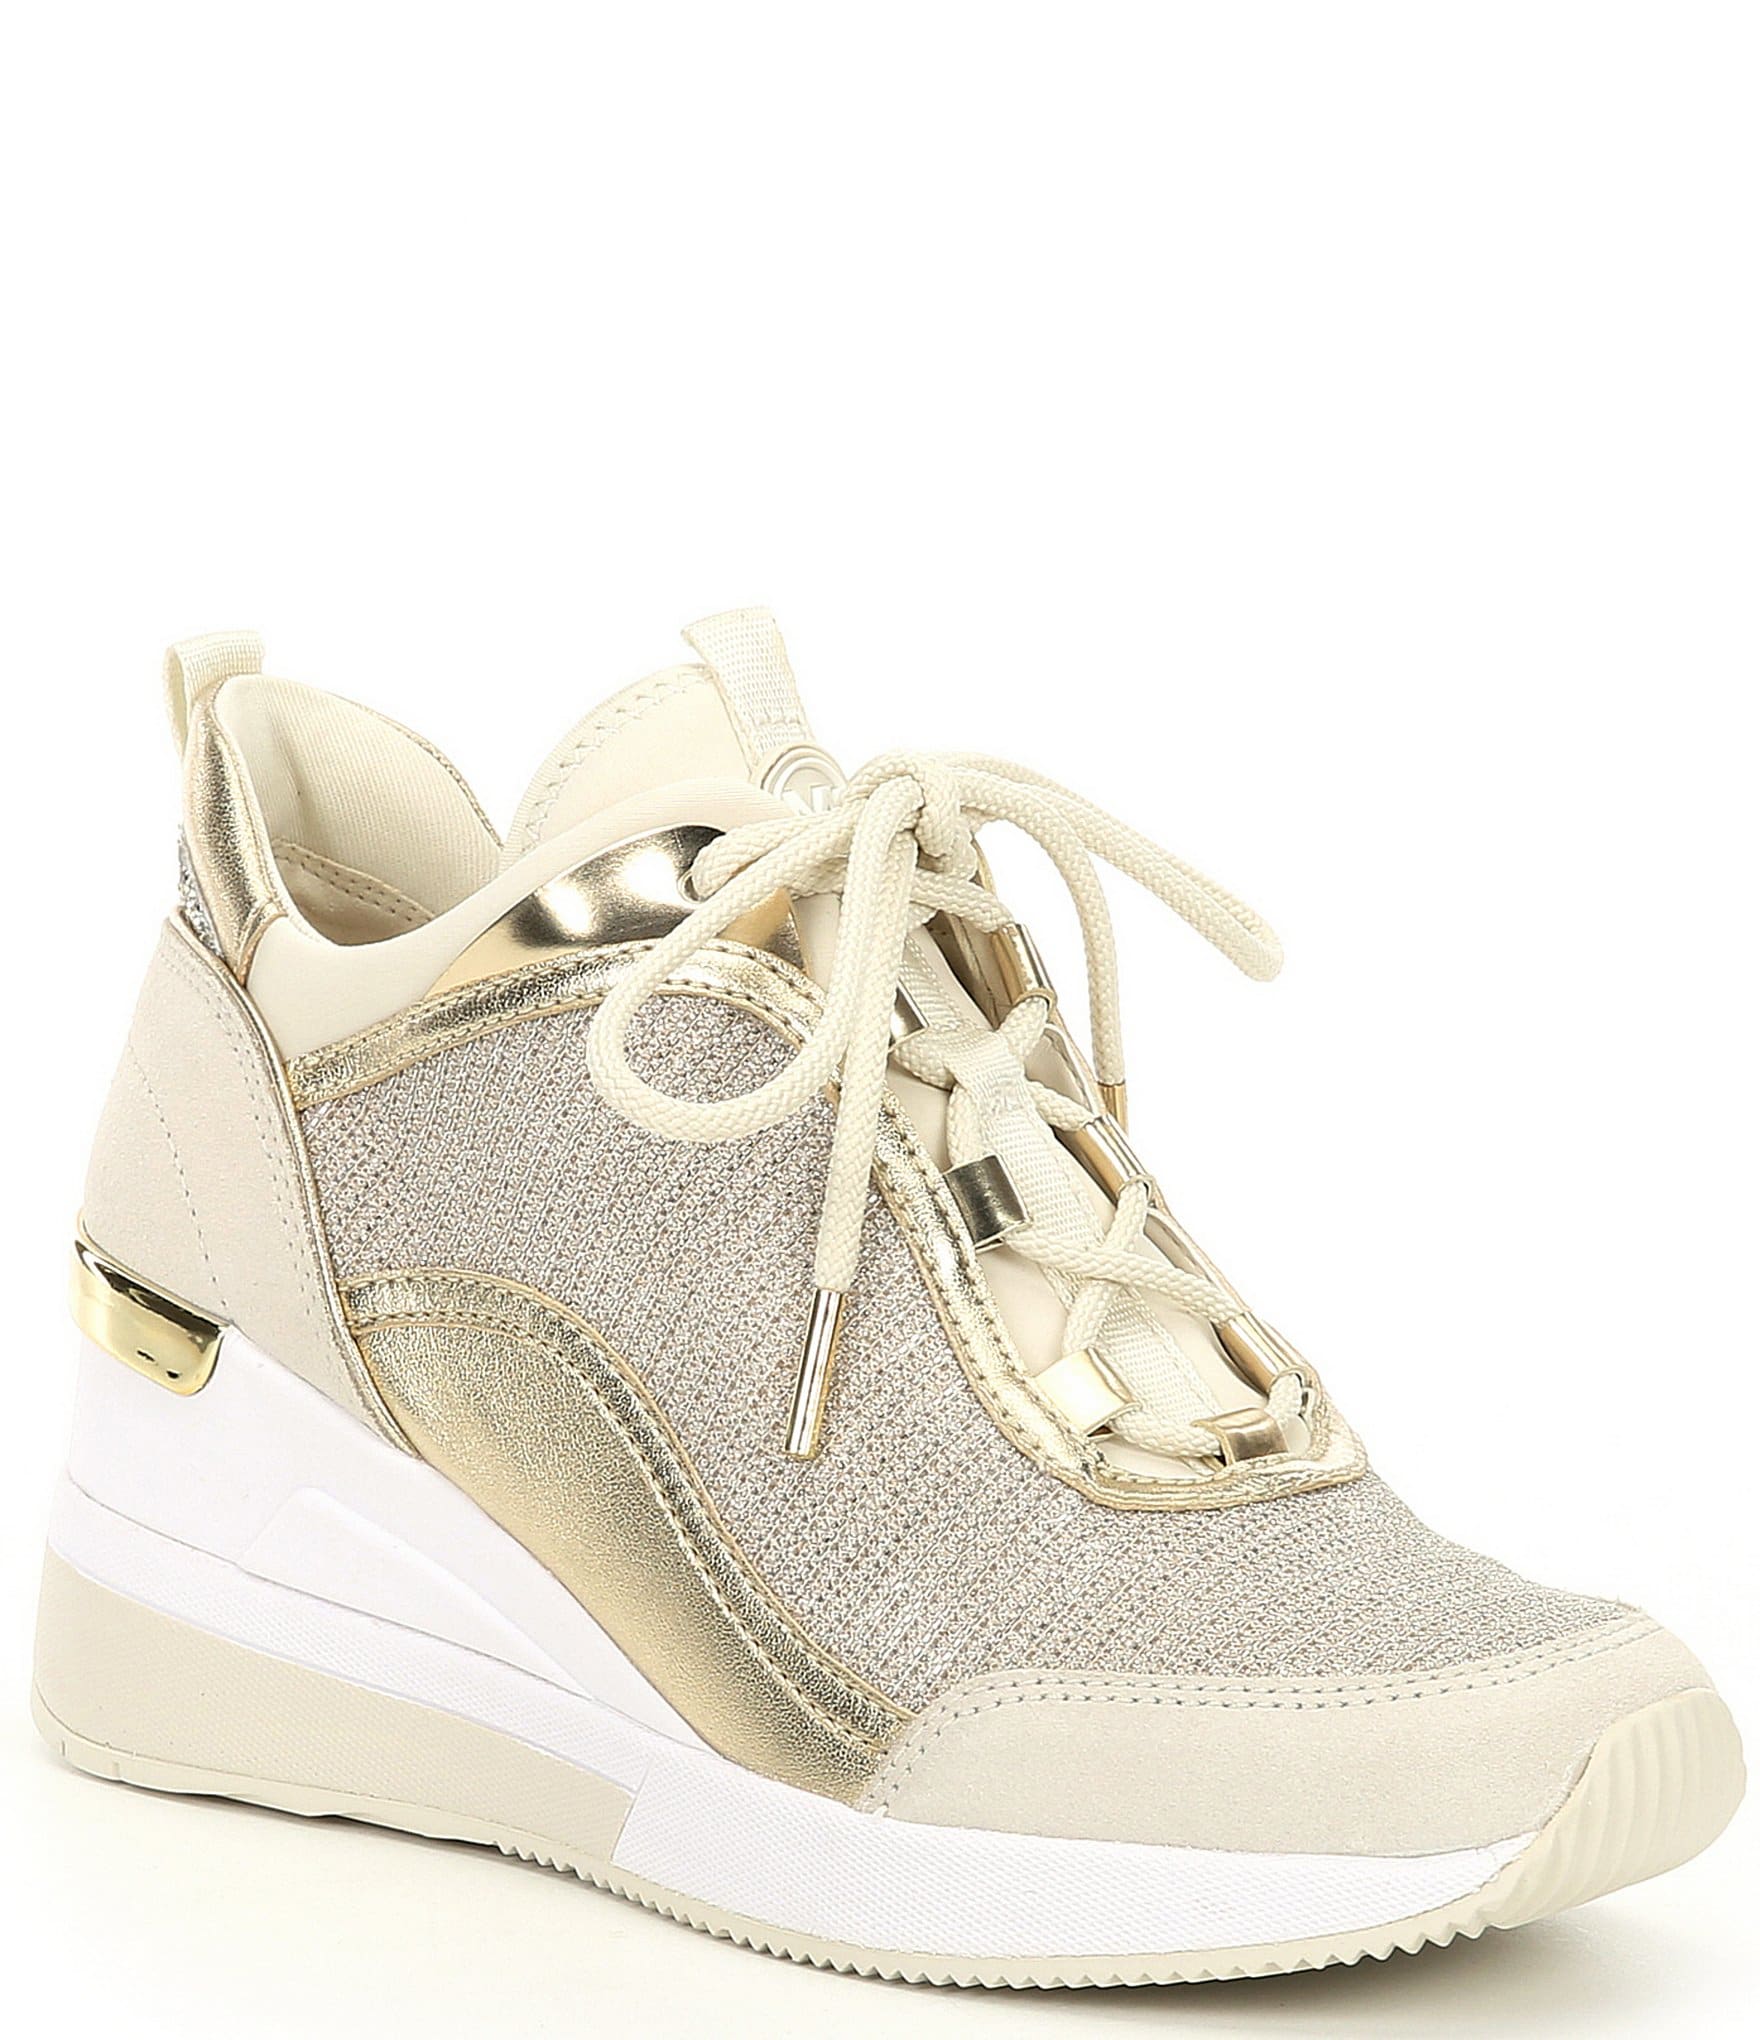 gold slip on sneakers womens